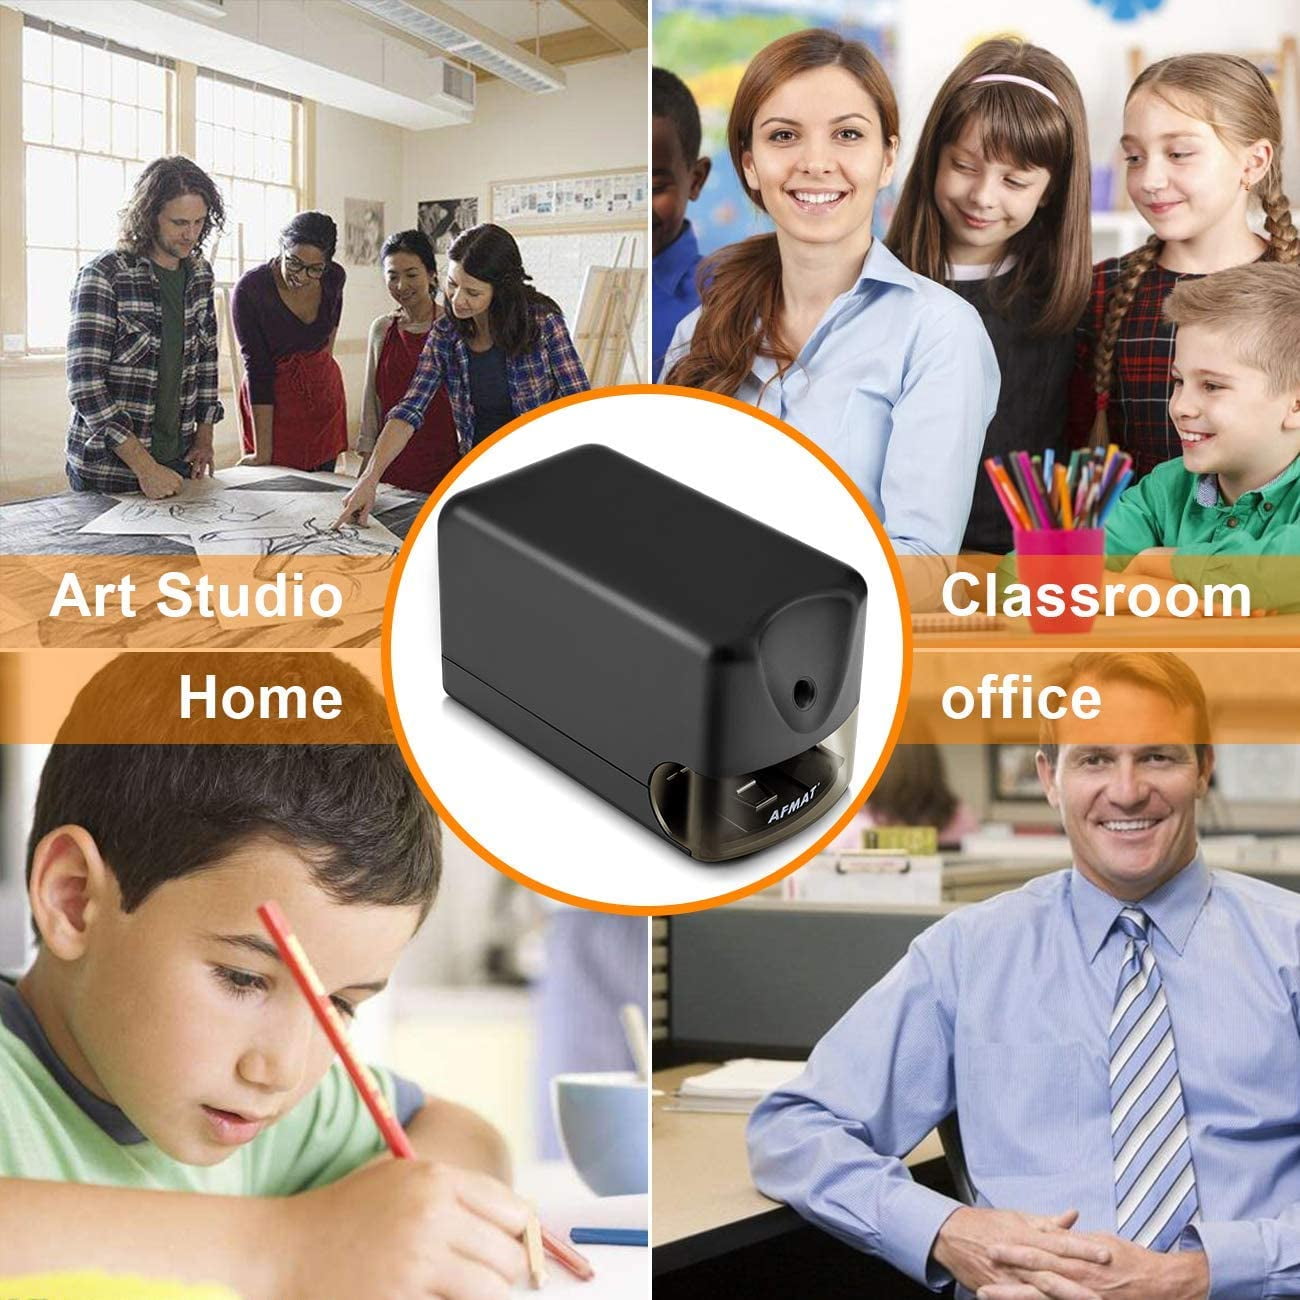 Electric Pencil Sharpener for Colored Pencils (6-8mm) with Adapter Bla –  AFMAT